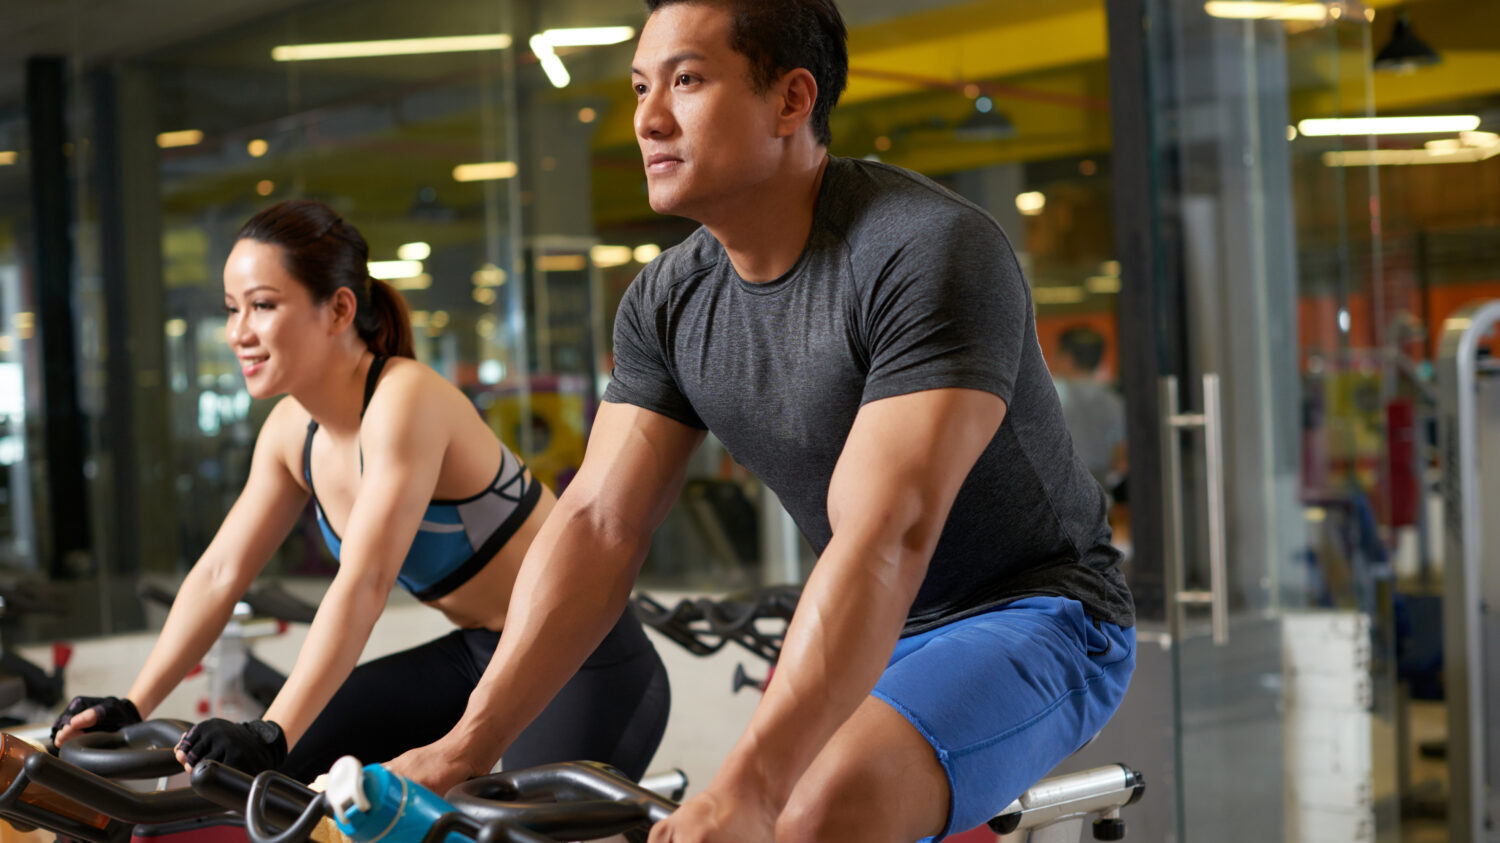 Sporty Asian couple riding stationary bicycles while having intensive workout at modern gym, group portrait (DragonImages/iStockphoto)